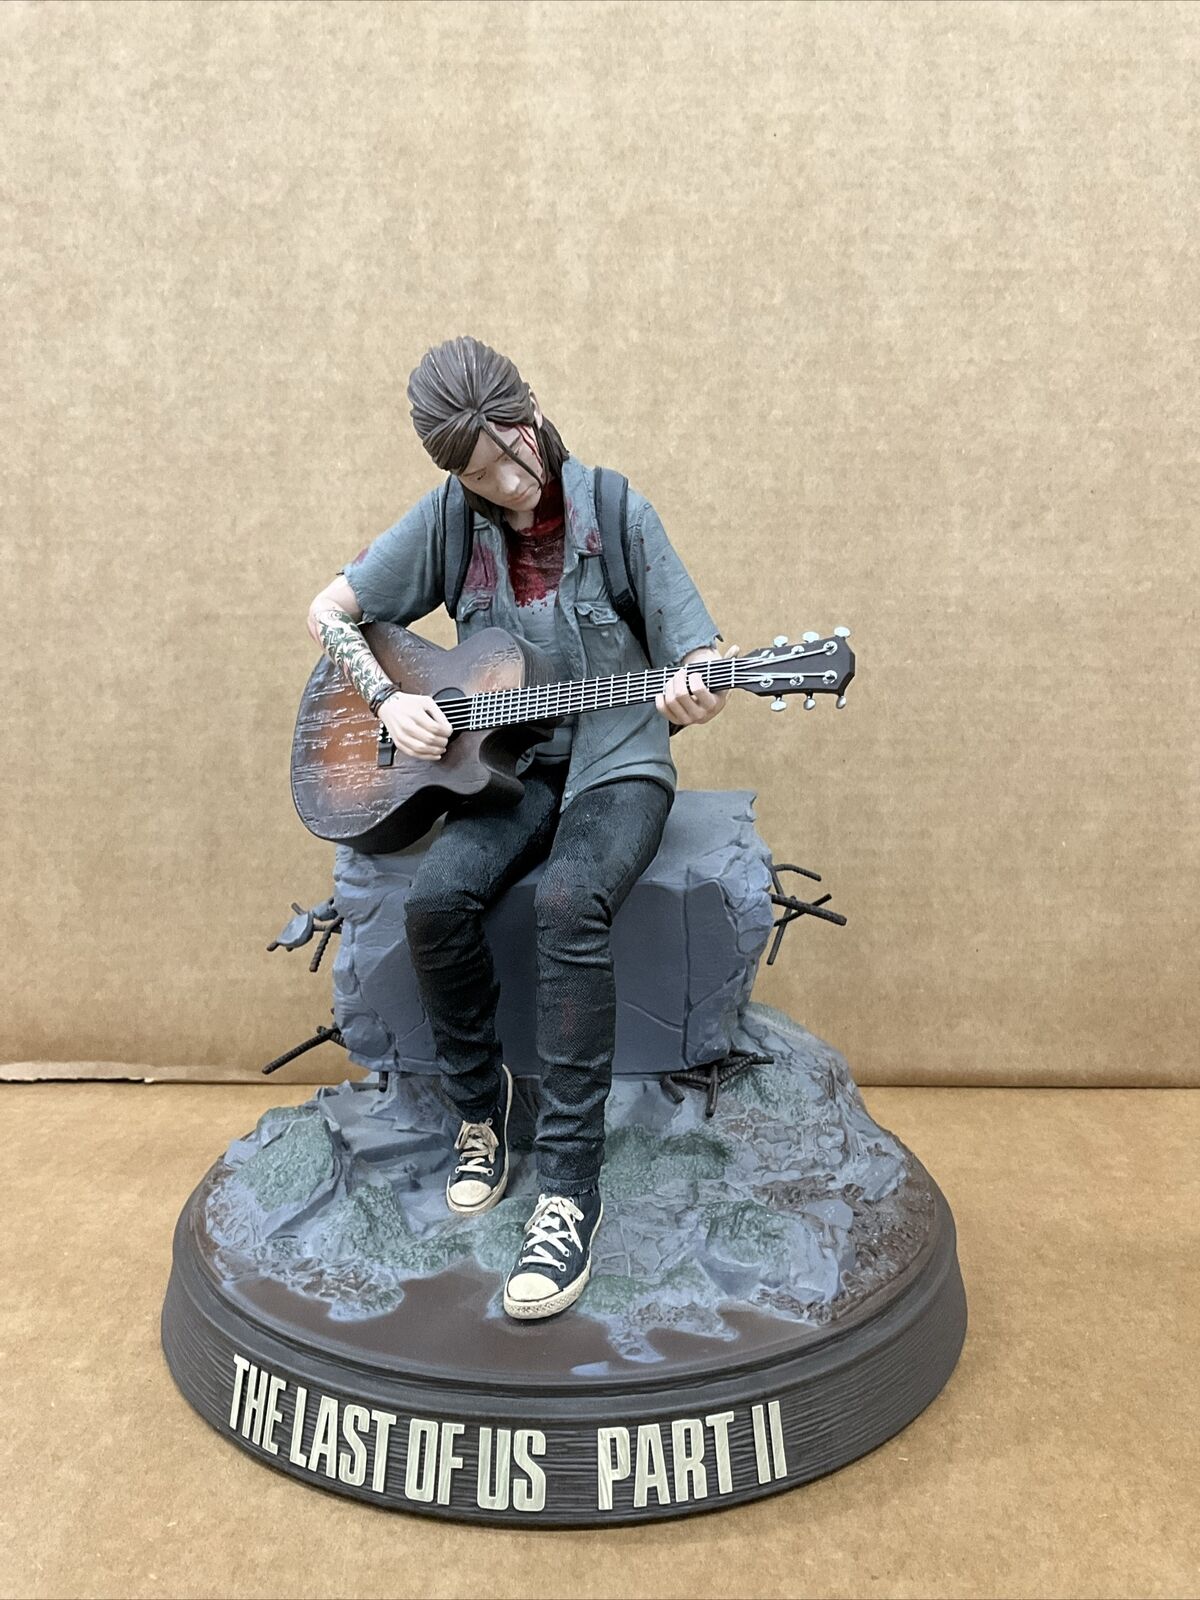 Ellie The Last of Us Part II Collectible 1/6 Figure Resin Statue Model Boy Gift